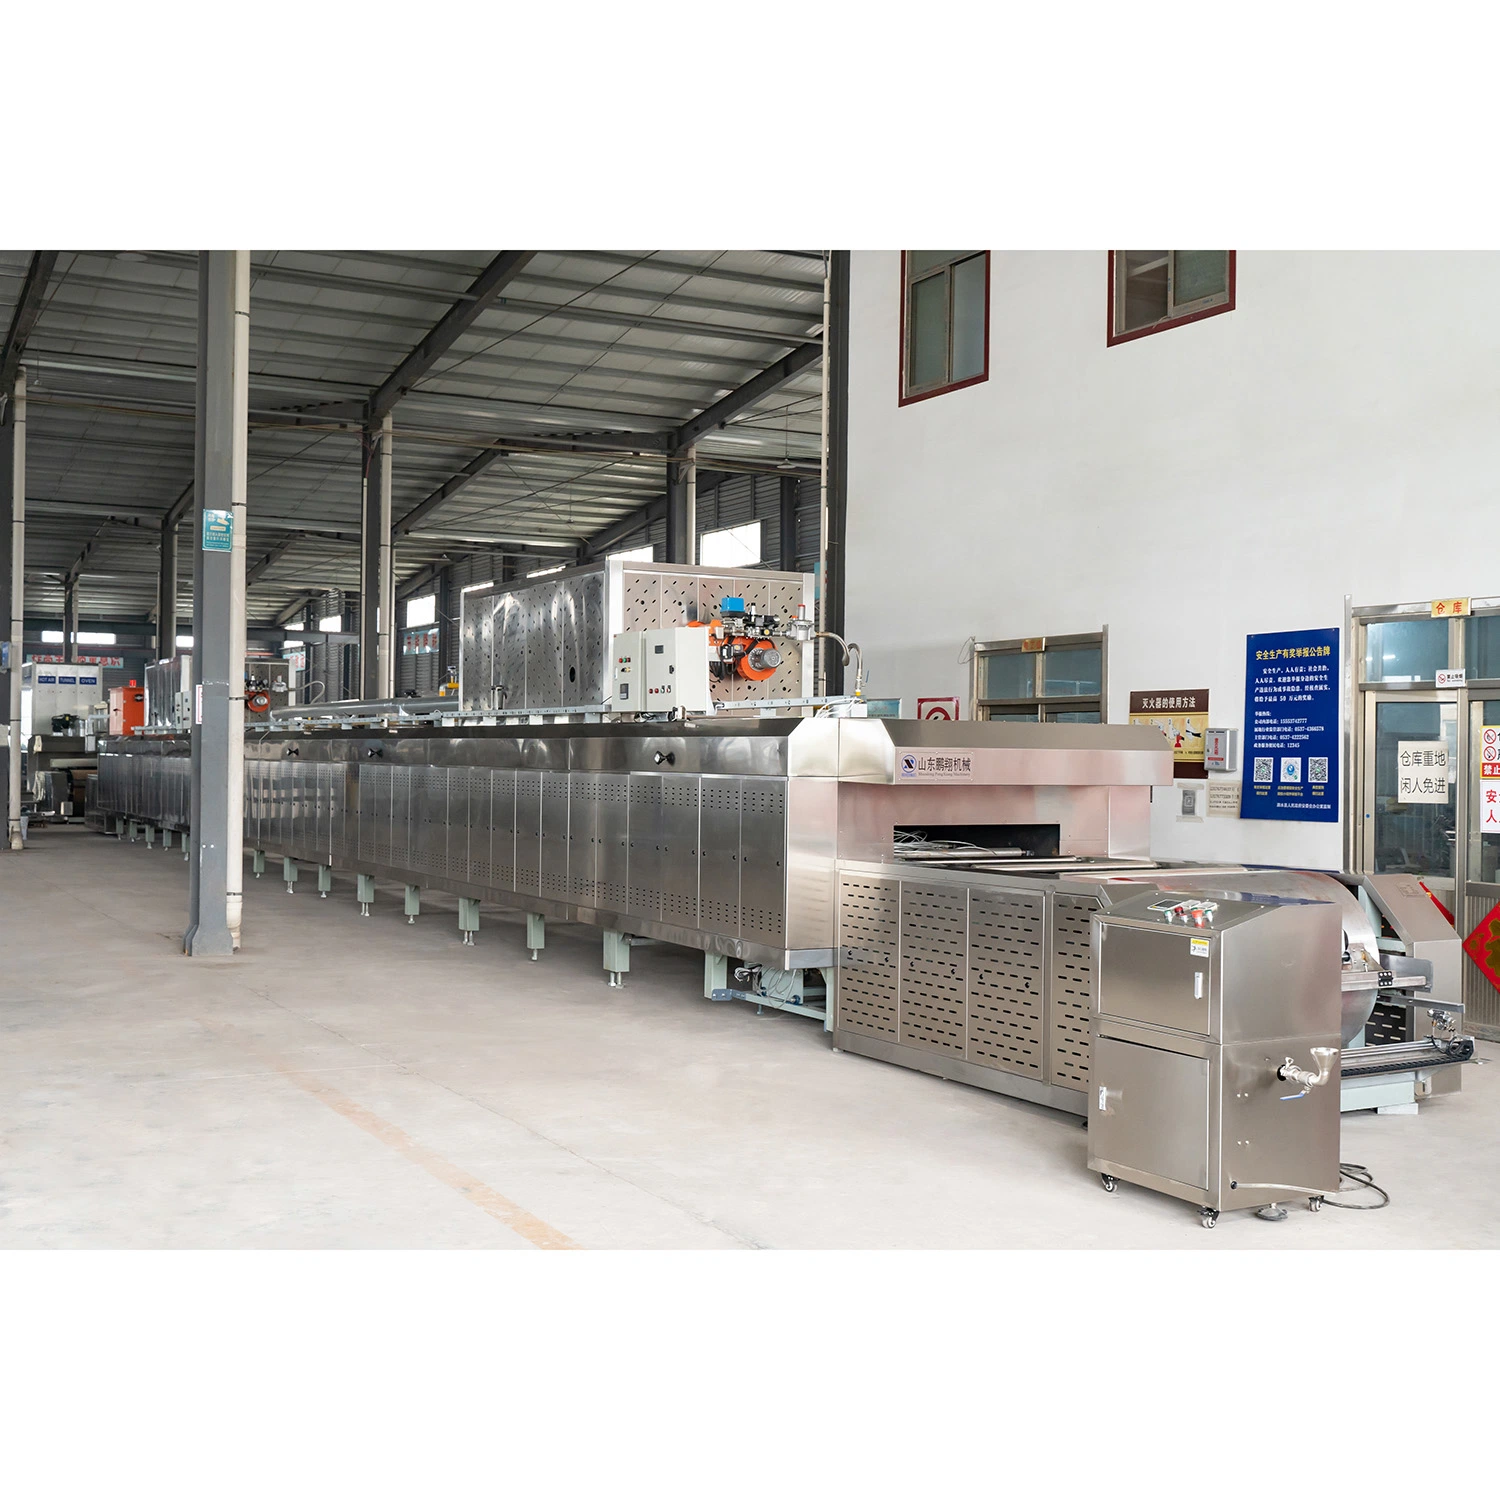 Electric Stainless Steel Baking Equipment Bakery Machine Tunnel Oven